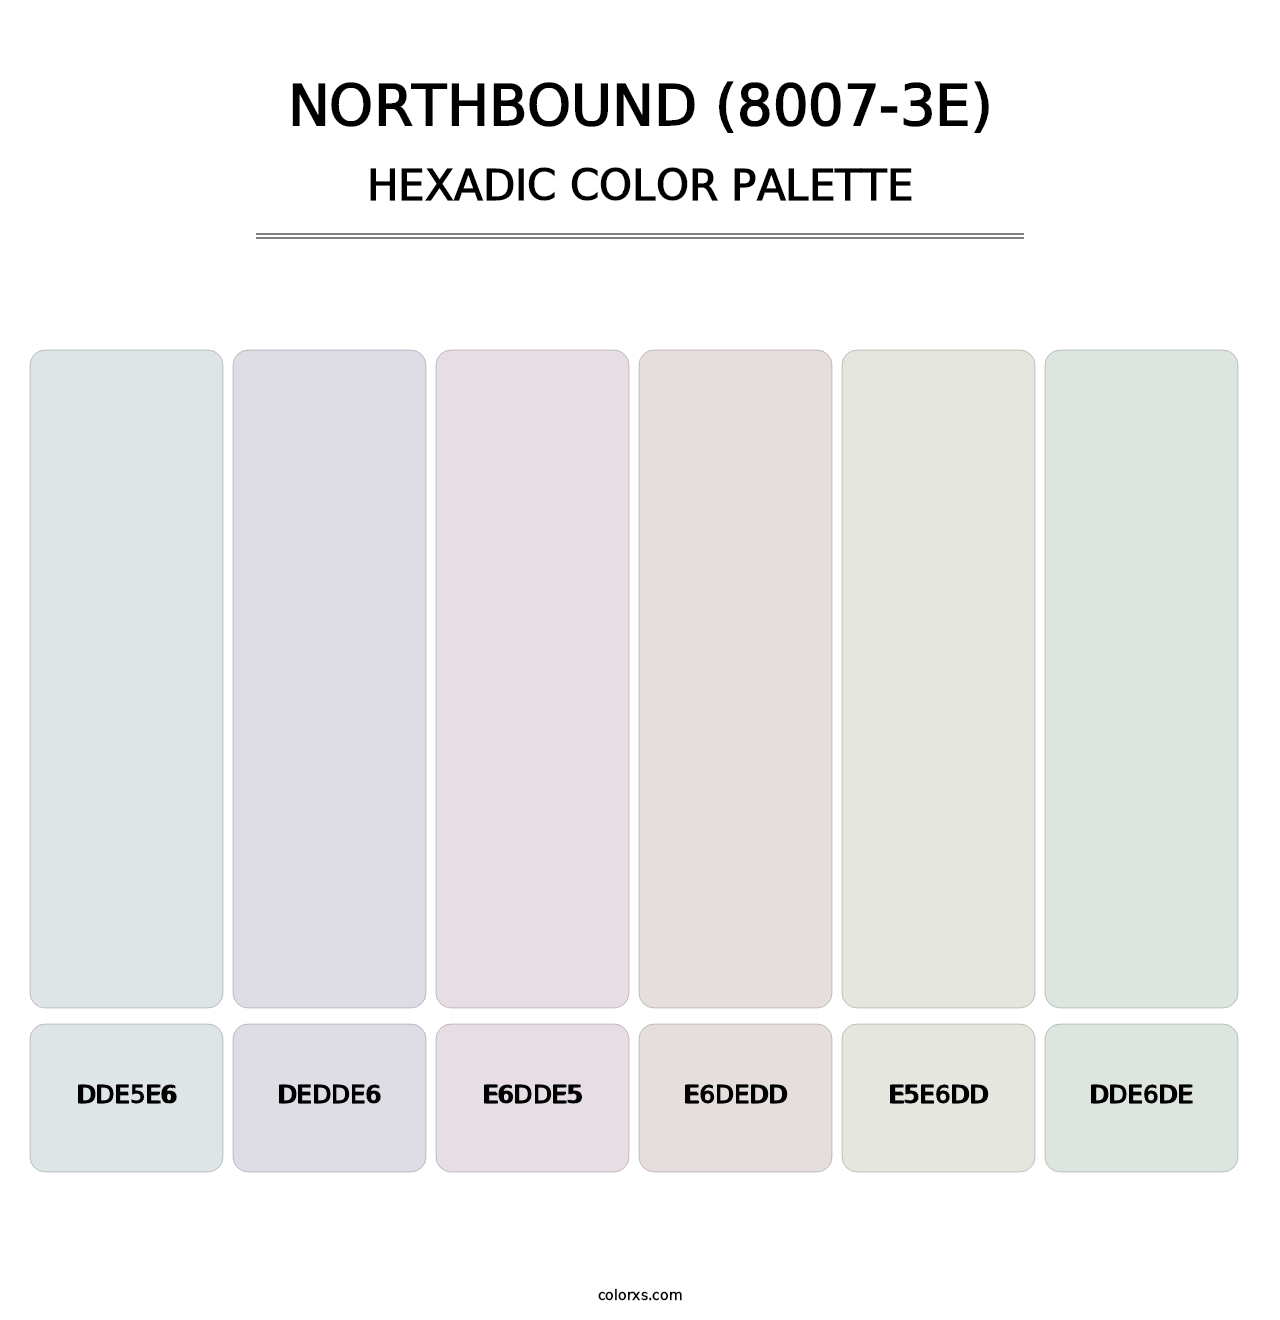 Northbound (8007-3E) - Hexadic Color Palette